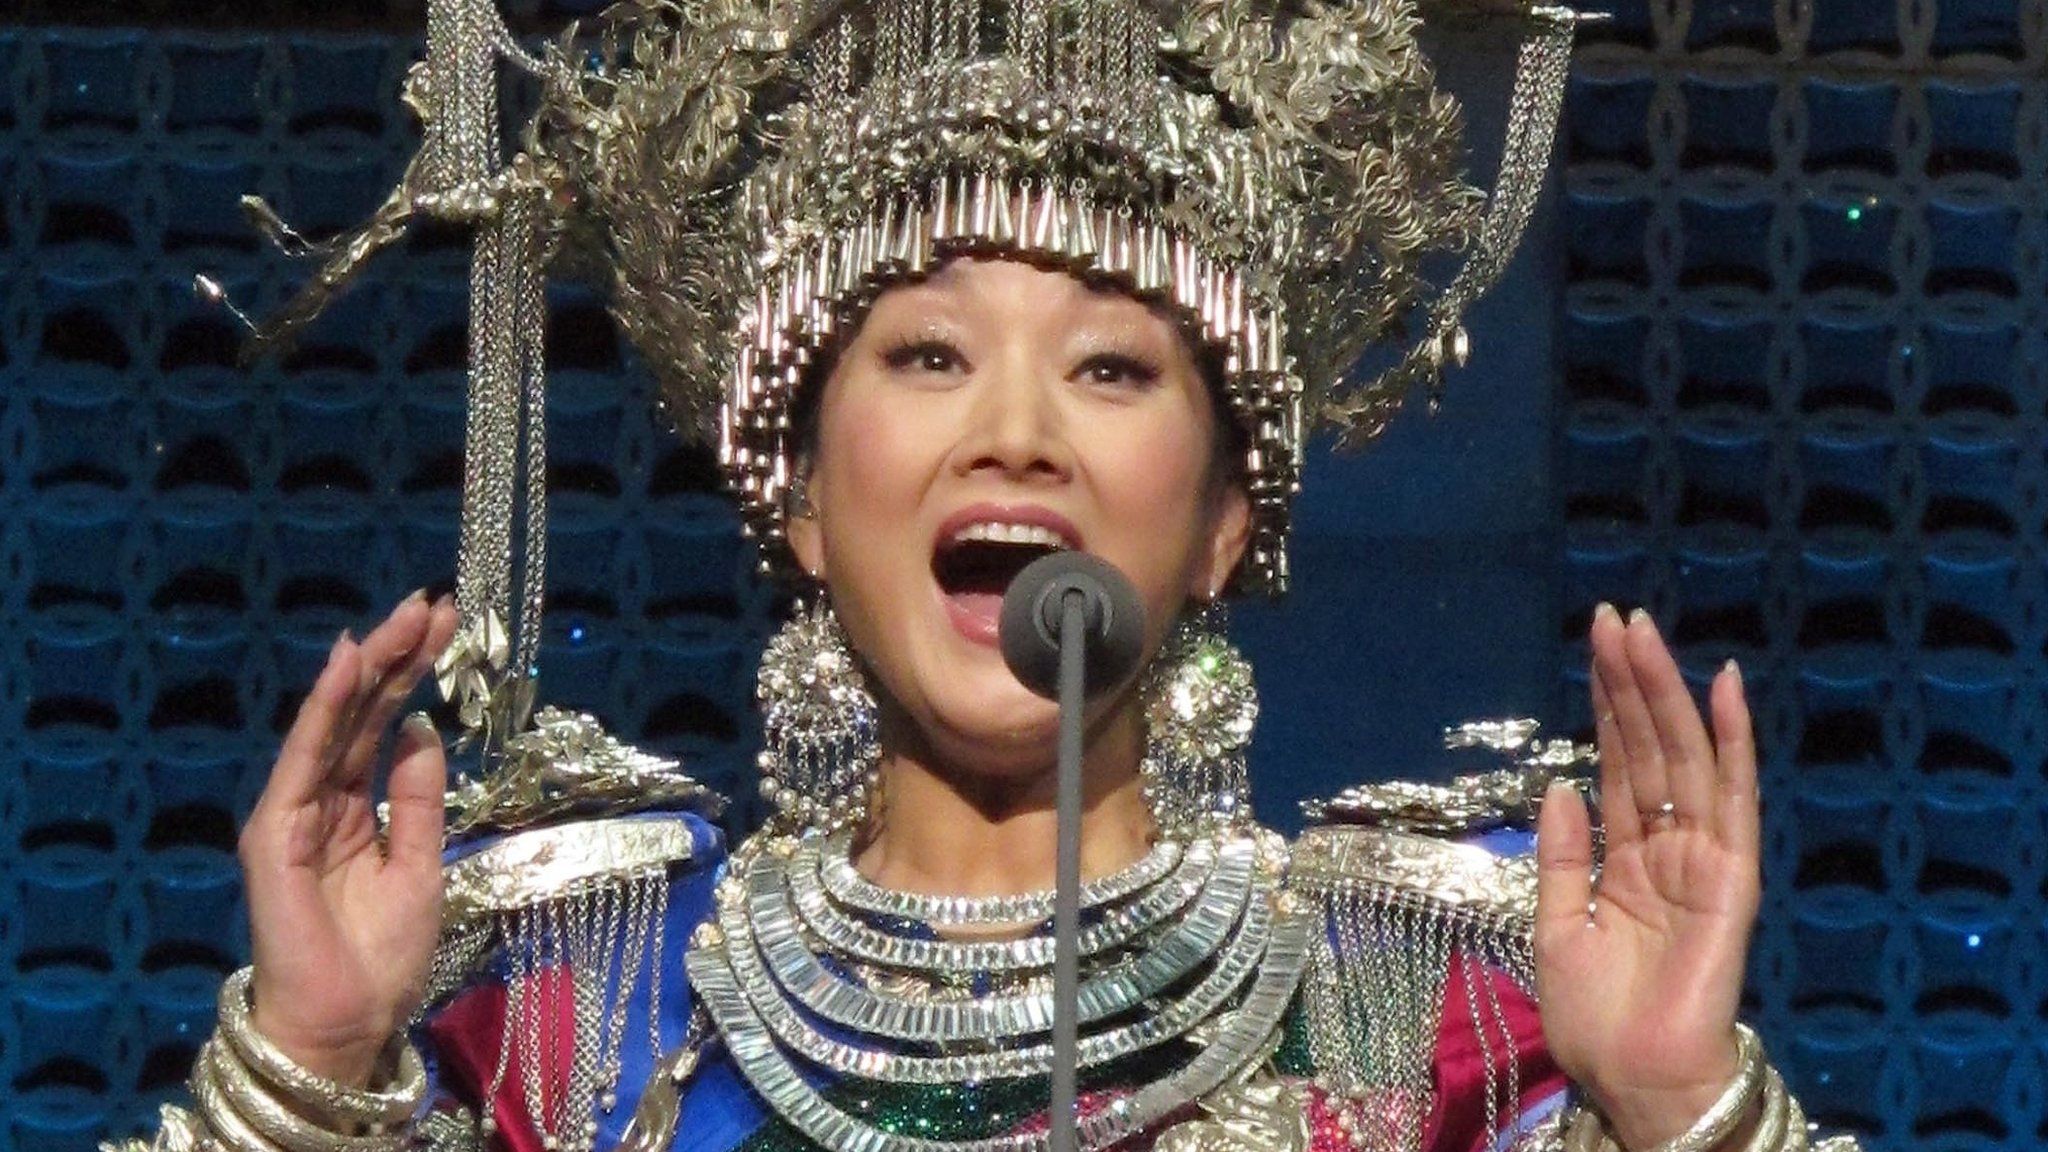 Song Zuying performs during the "Cultures of China, Festival of Spring" concert at the Shrine Auditorium in Los Angeles (March 2013)